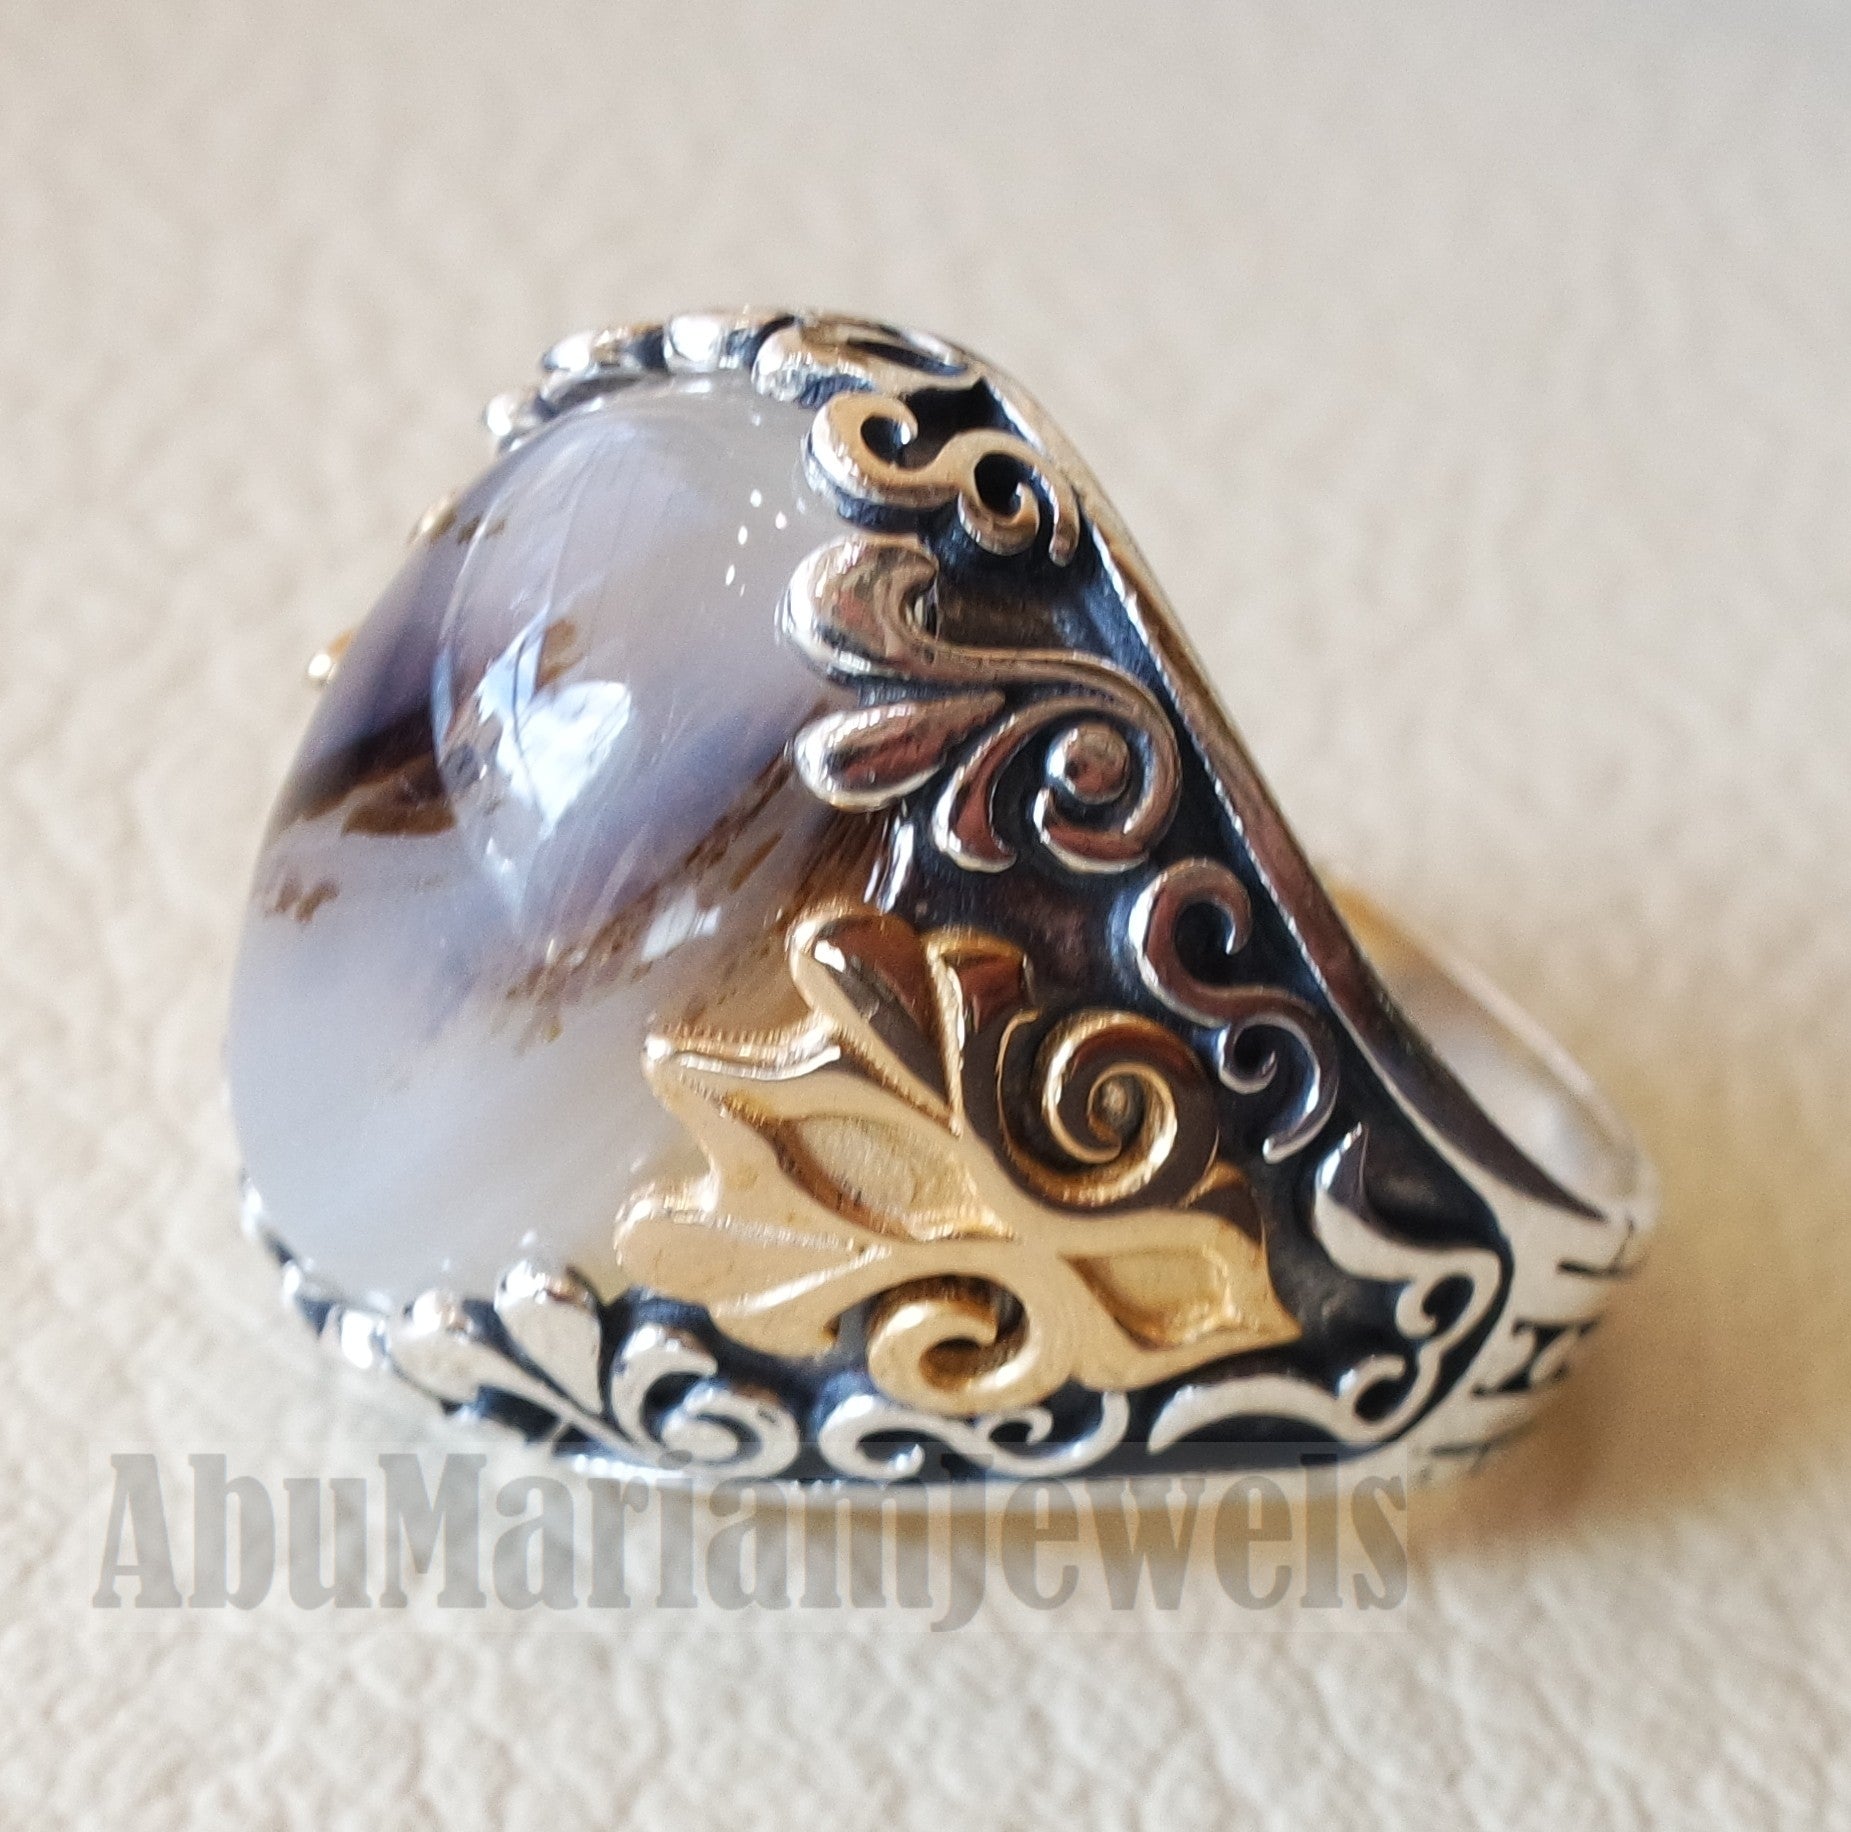 oval yamani aqeeq natural semi precious multi color agate gemstone men ring sterling silver 925 and bronze jewelry all sizes عقيق يماني aq001